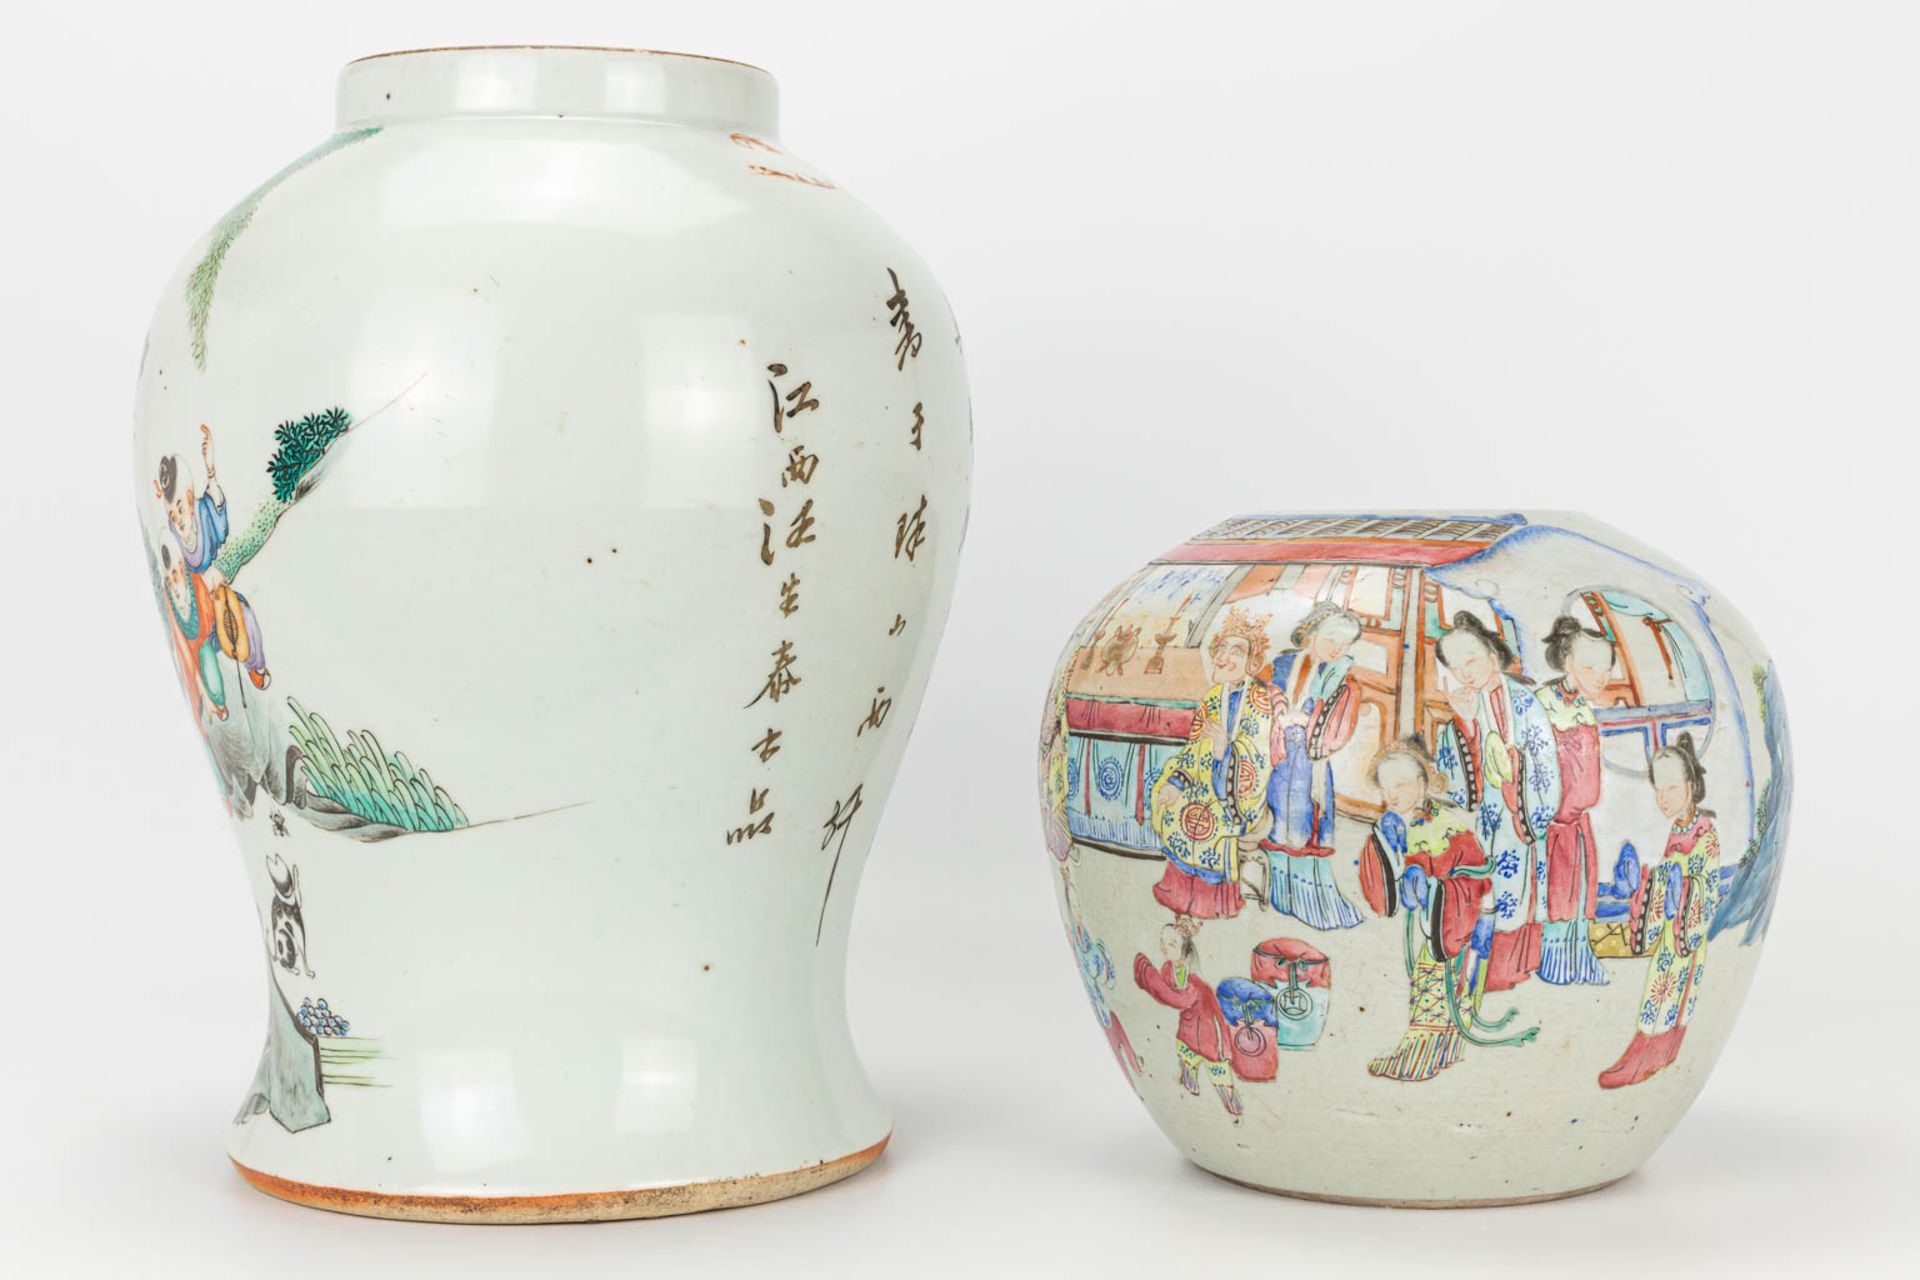 A set of 4 items made of Chinese porcelain. 2 small bowls and 2 ginger jars without lids. - Image 9 of 23